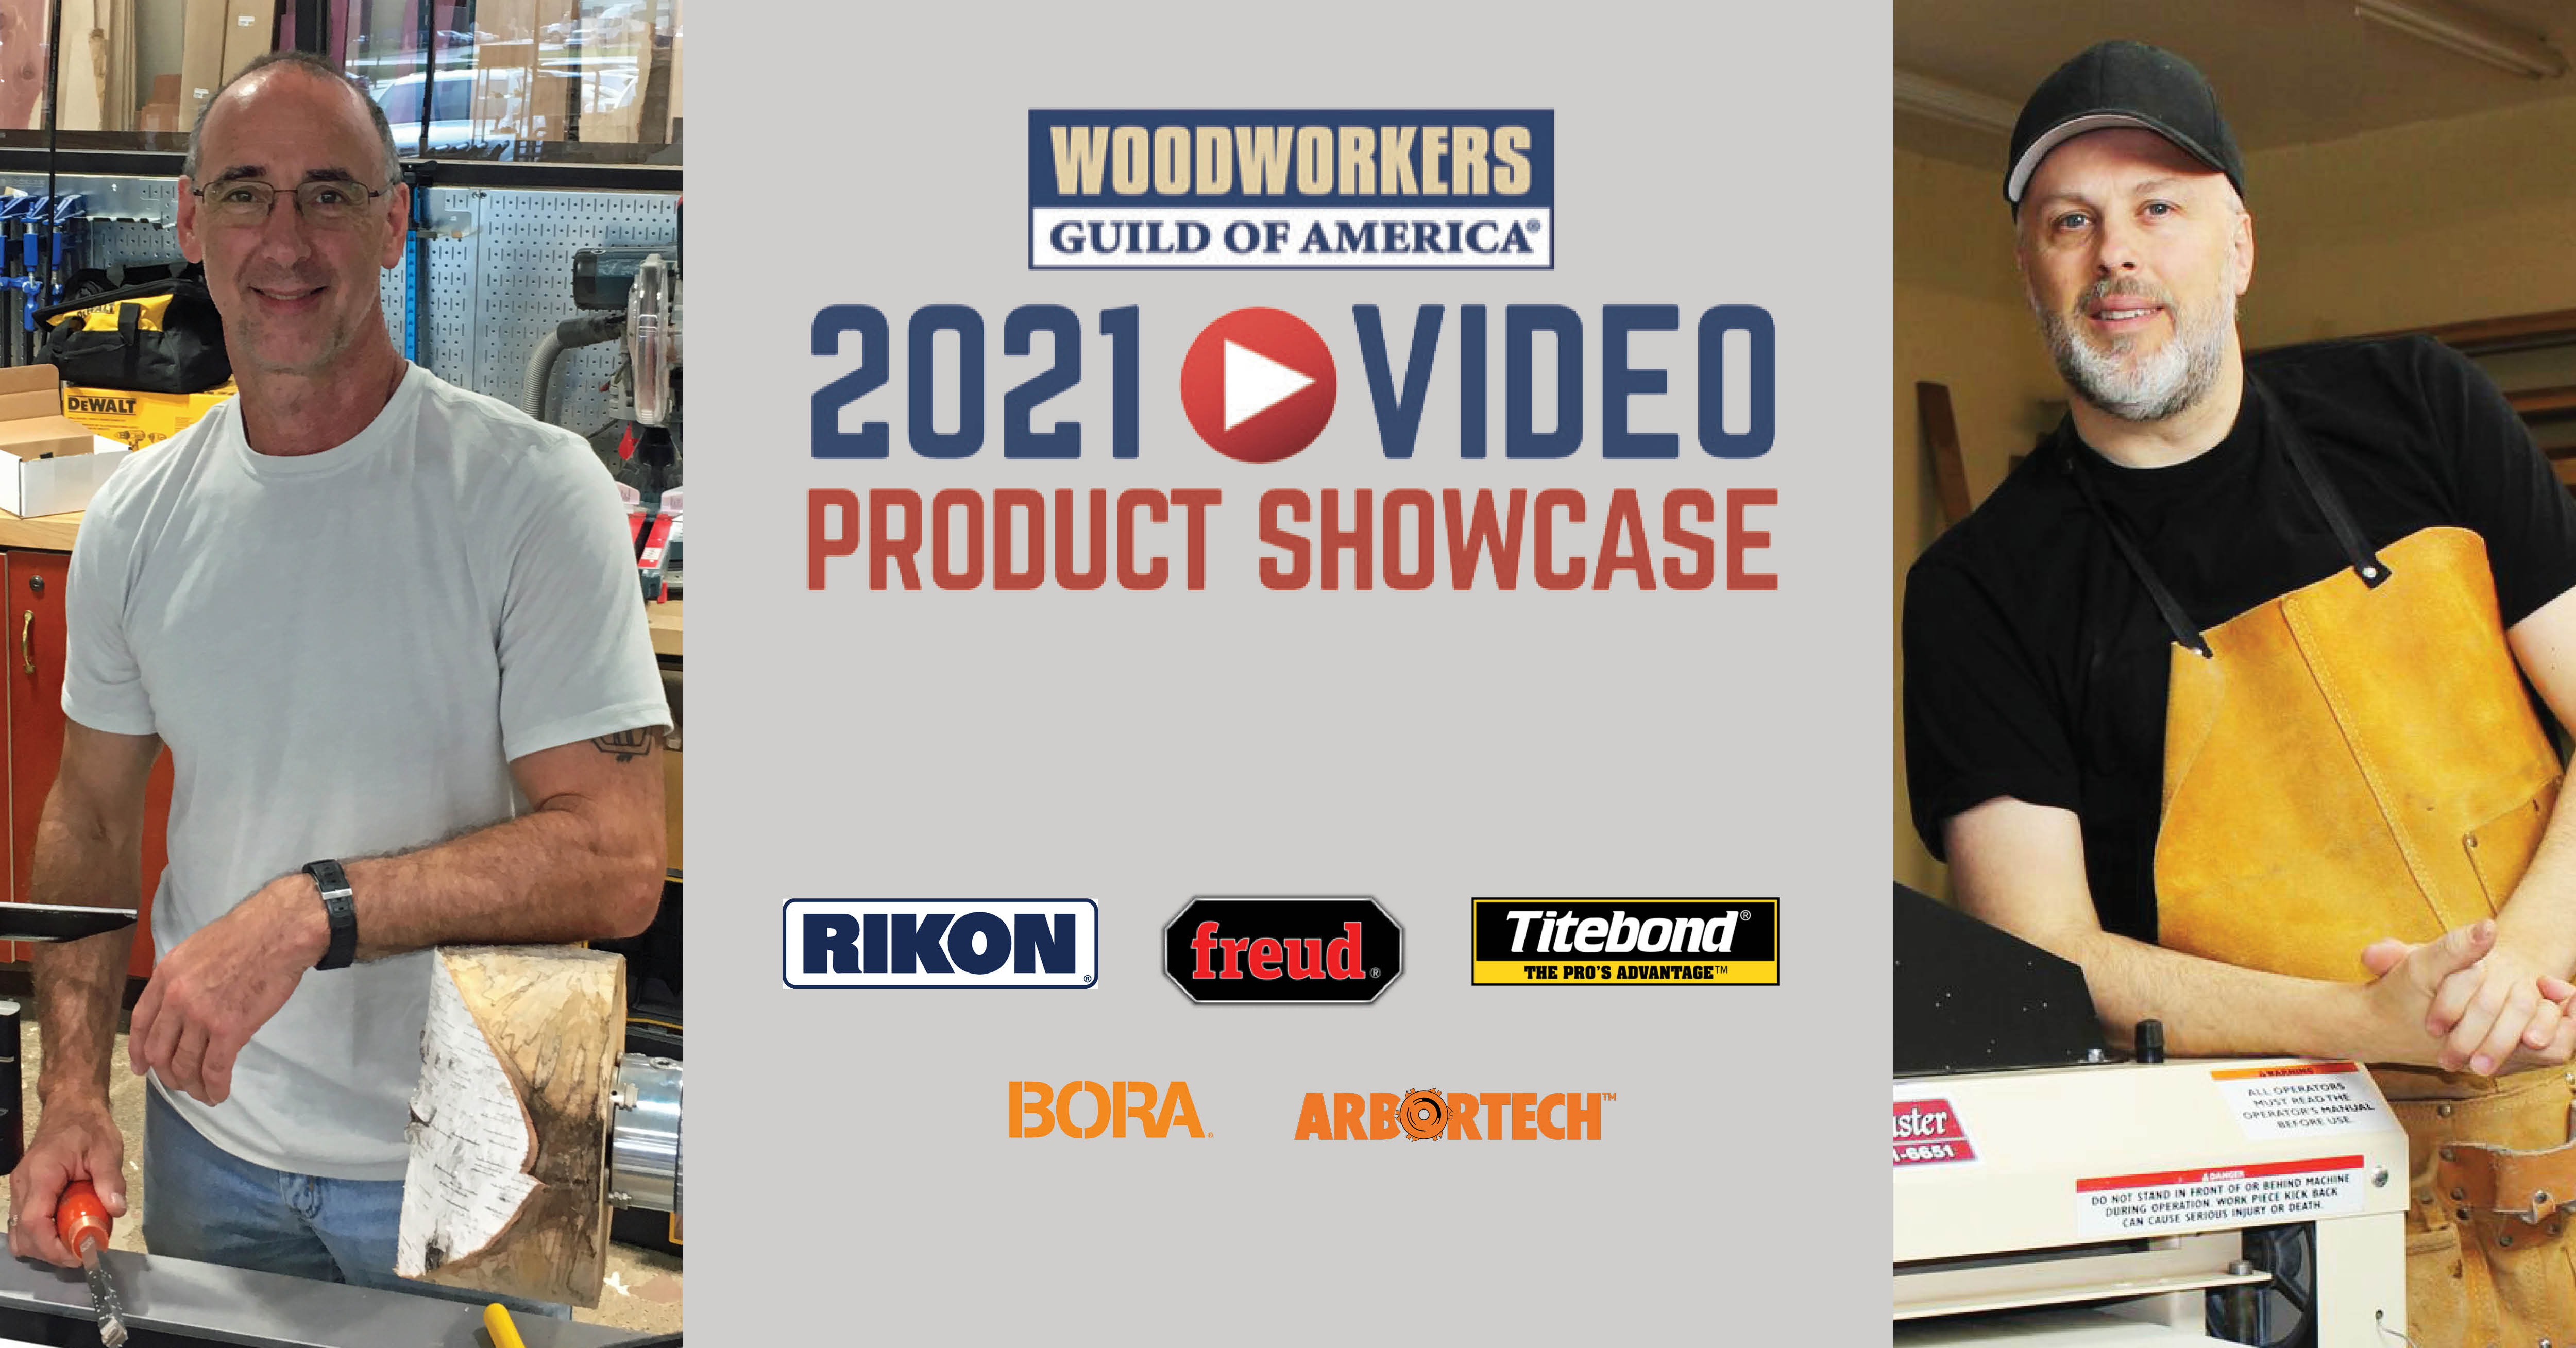 Ad for 2021 Video Product Showcase